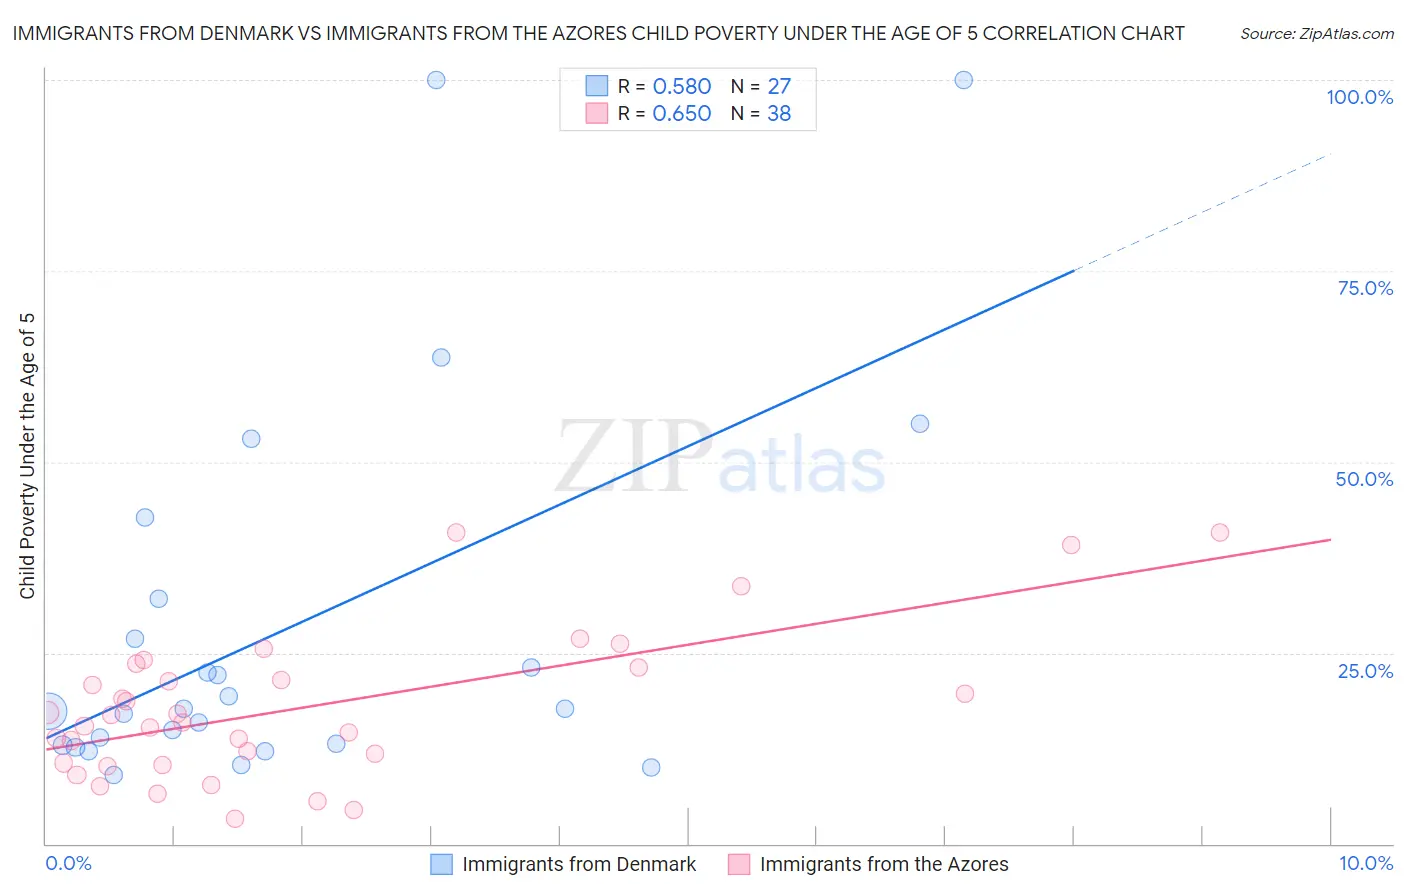 Immigrants from Denmark vs Immigrants from the Azores Child Poverty Under the Age of 5